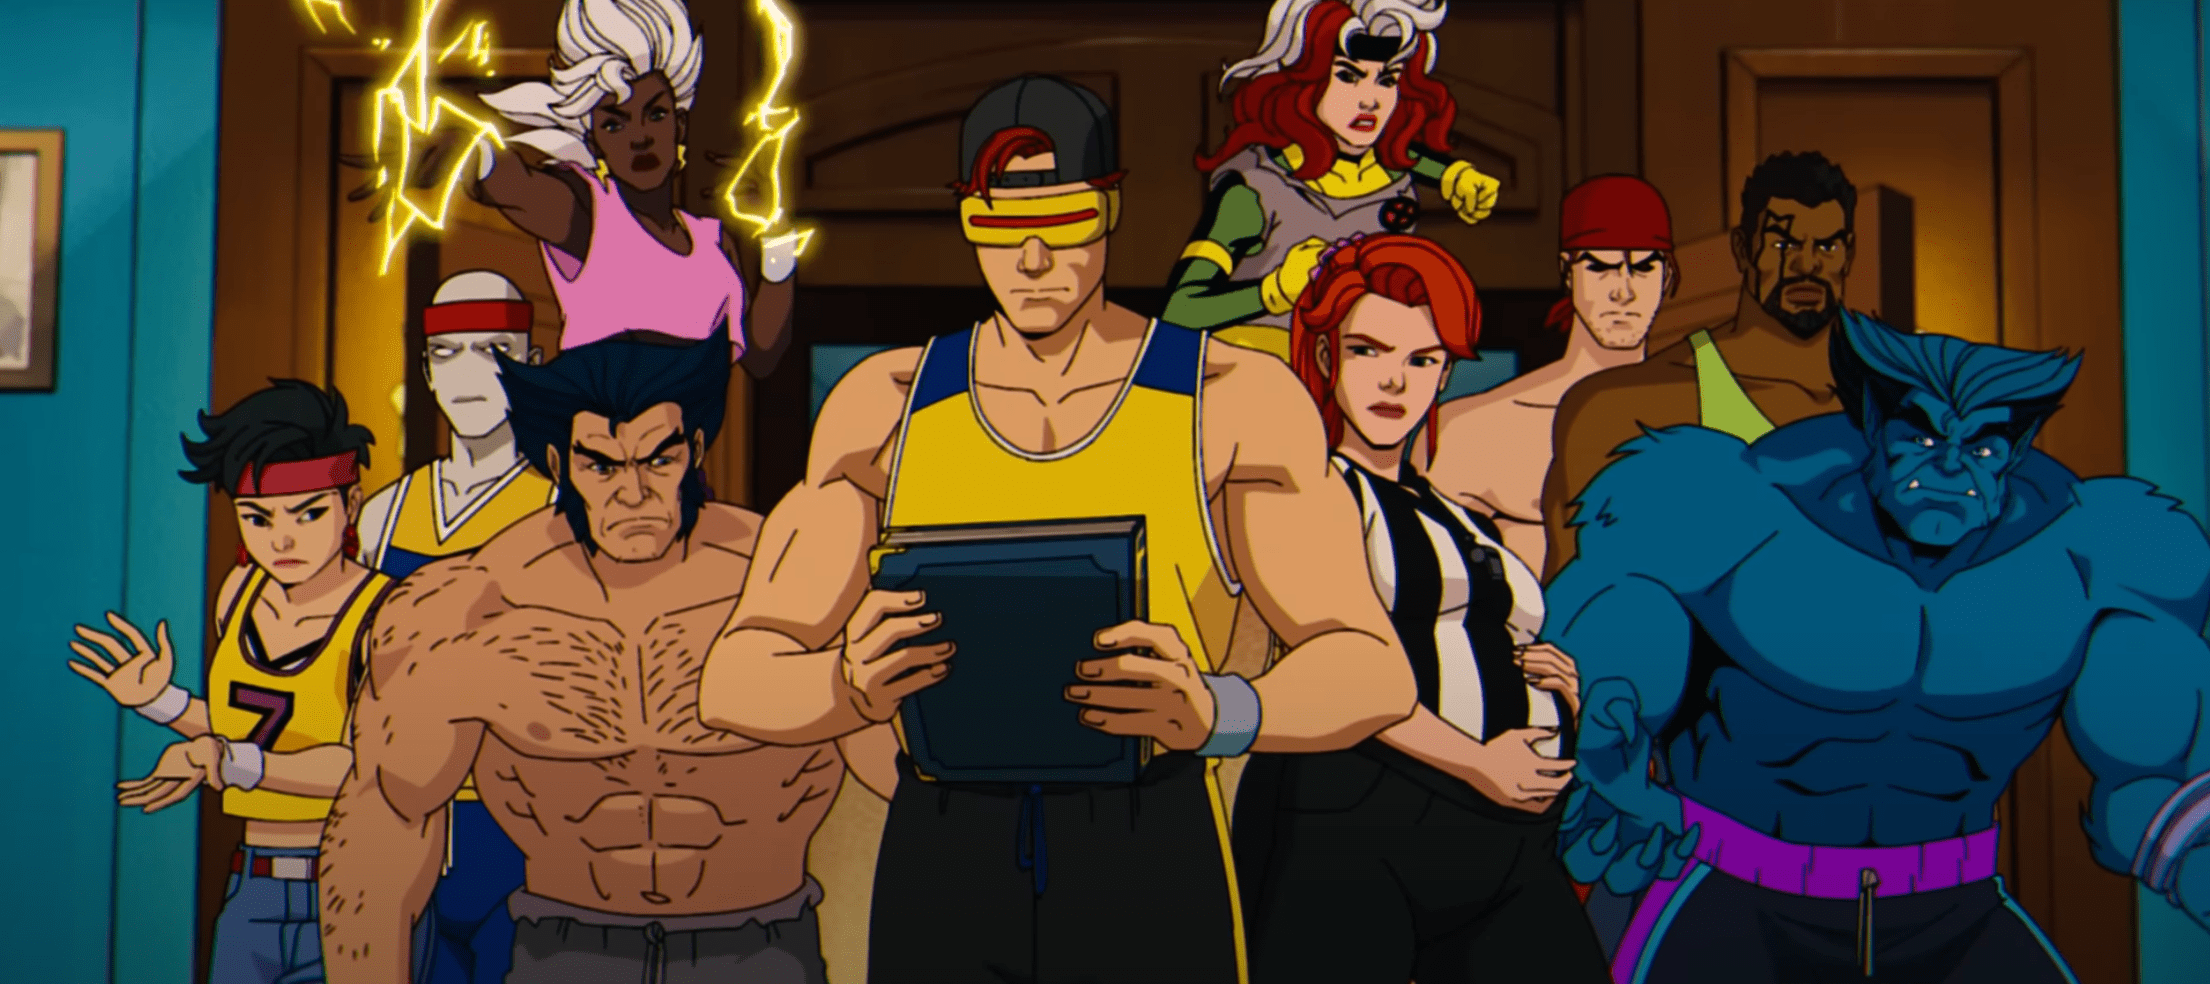 'Marvel Animation's X-Men '97' trailer is here and it gets nostalgic